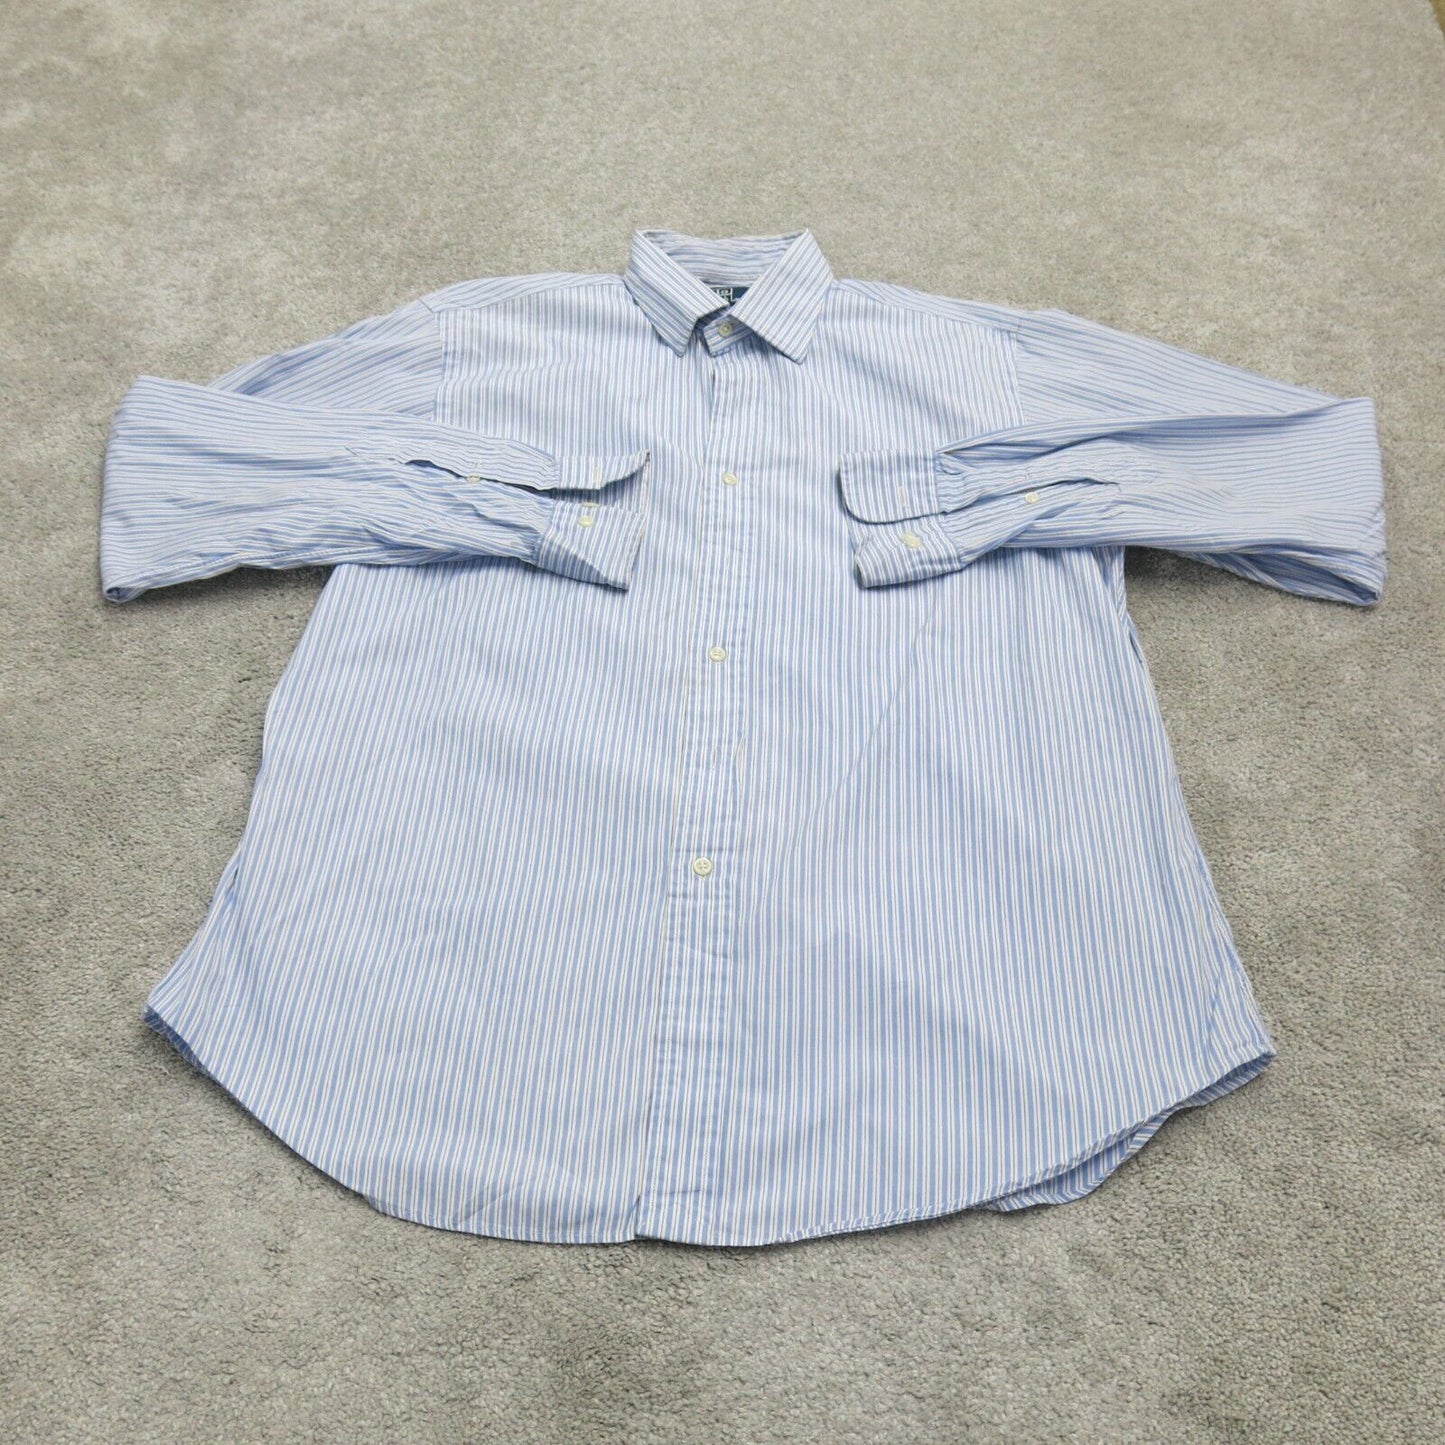 Polo By Ralph Lauren Mens Button up Curham Classic Fit Striped Blue/White 16.5